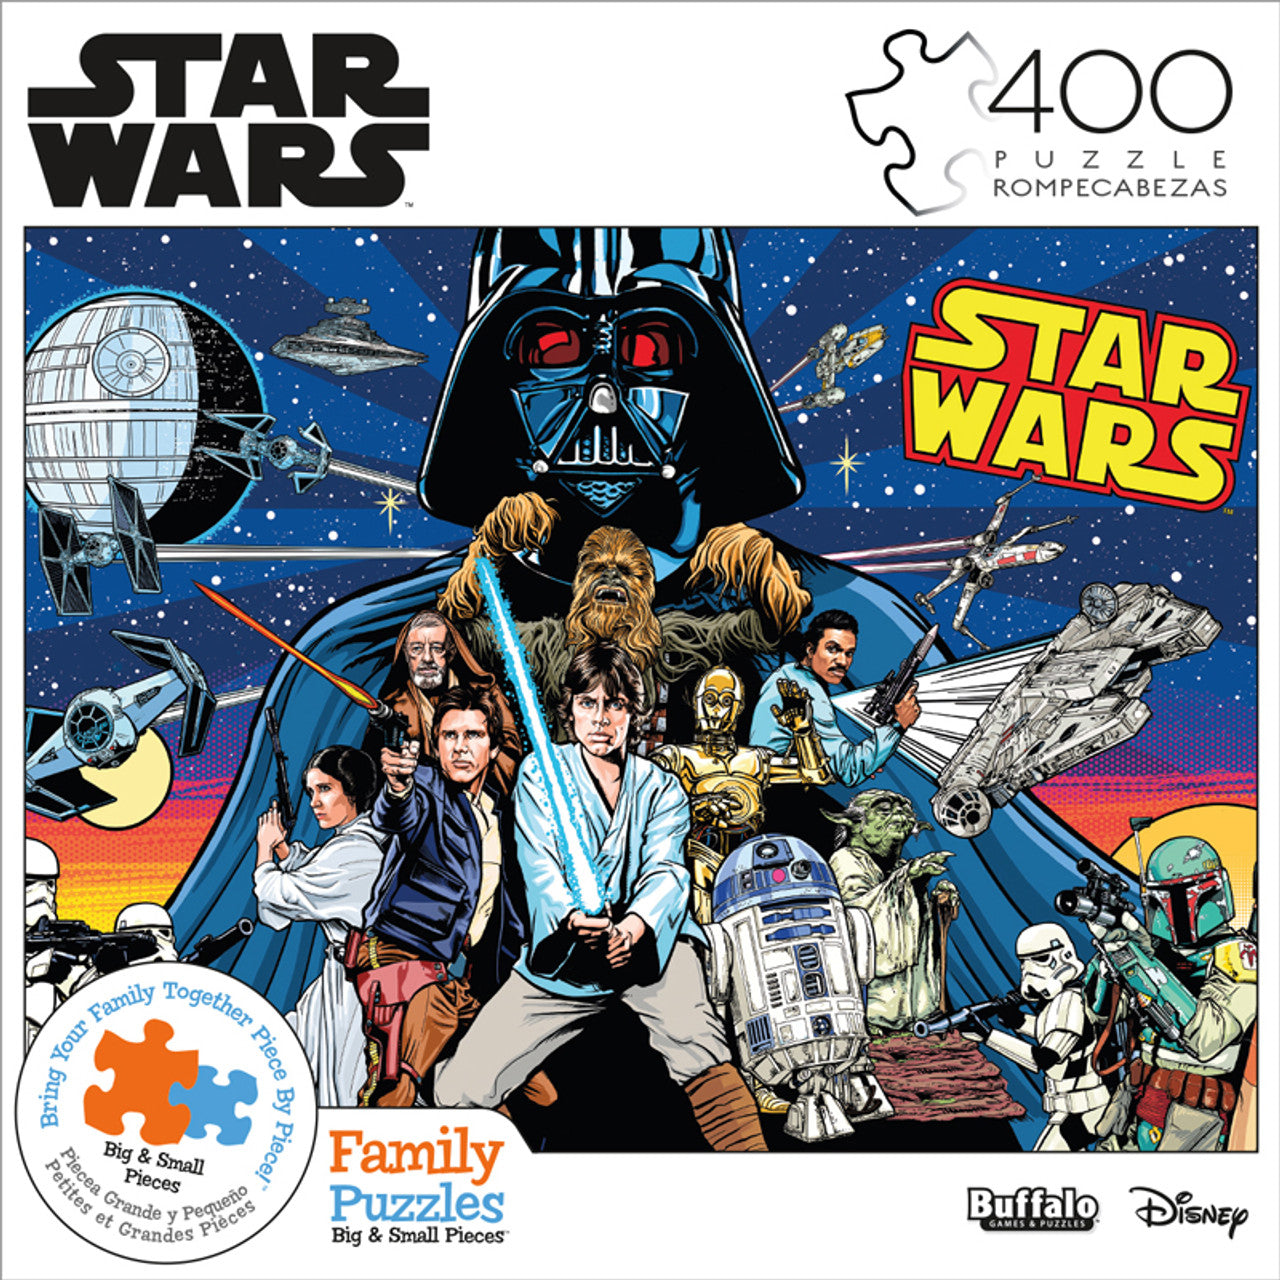 Buffalo Games Star Wars Original Trilogy Posters Collage Puzzle, 1000 pc -  Kroger